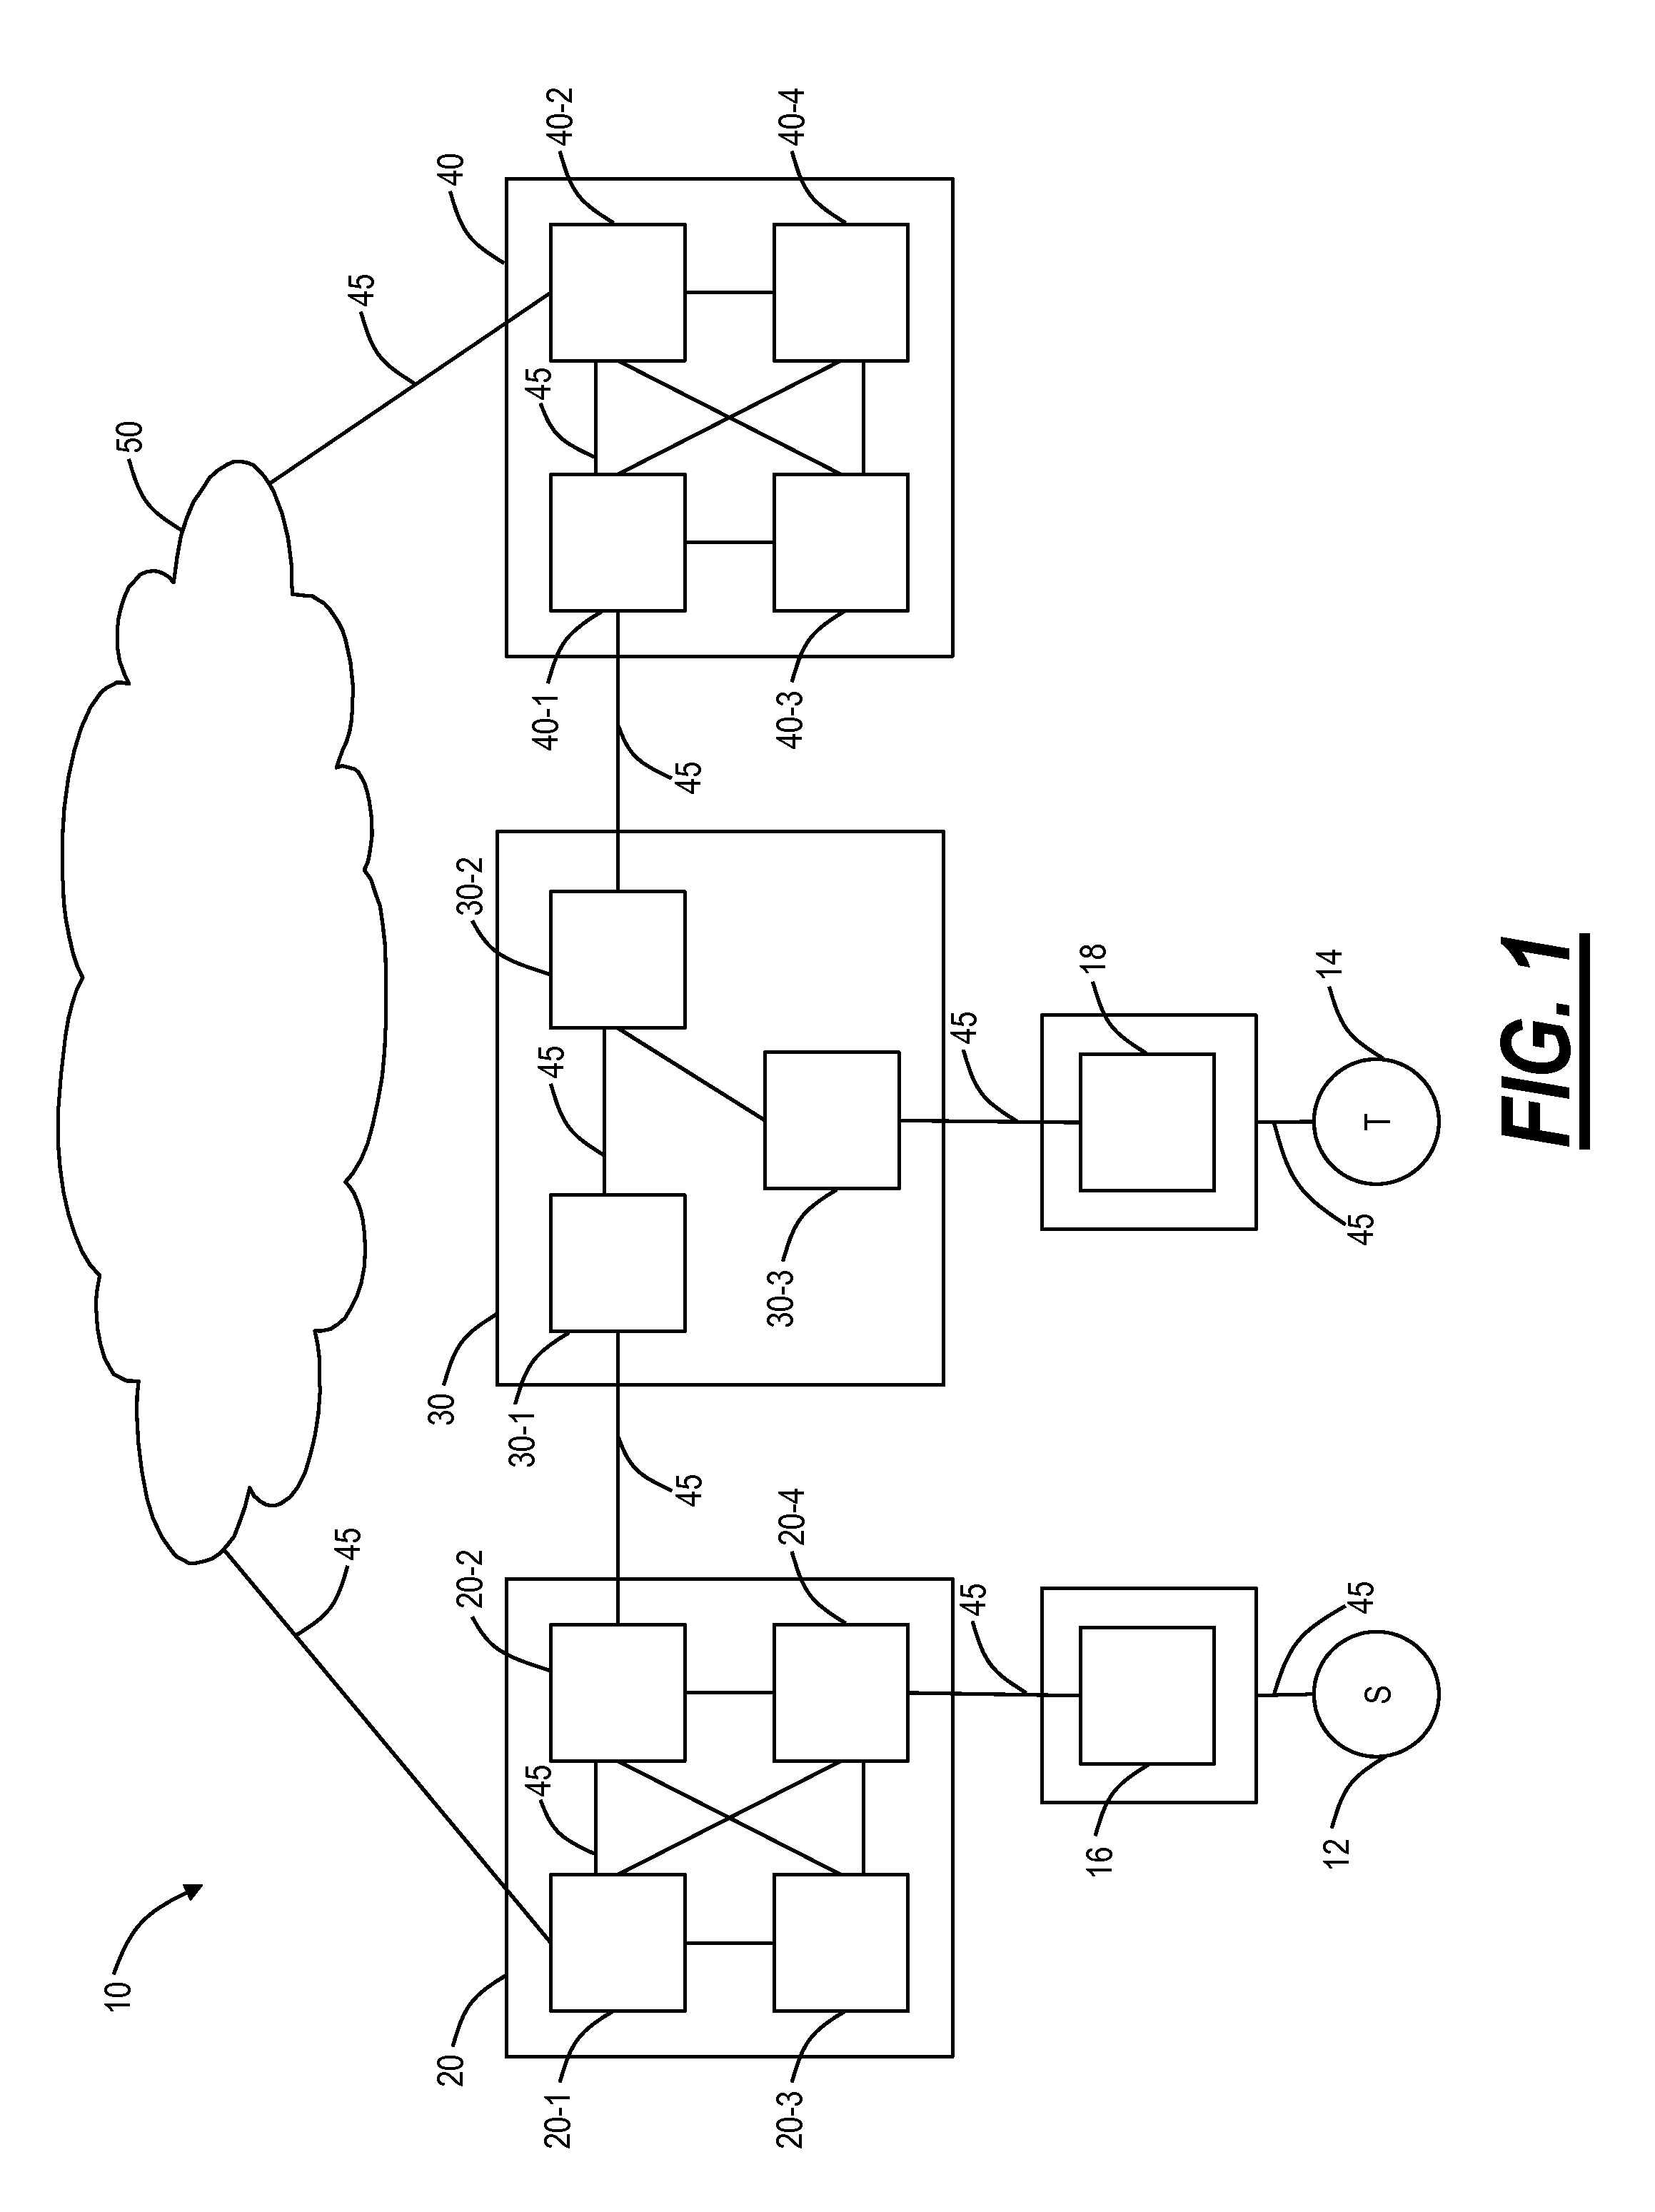 Shortest path routing systems and methods for networks with non-fully meshed vertices